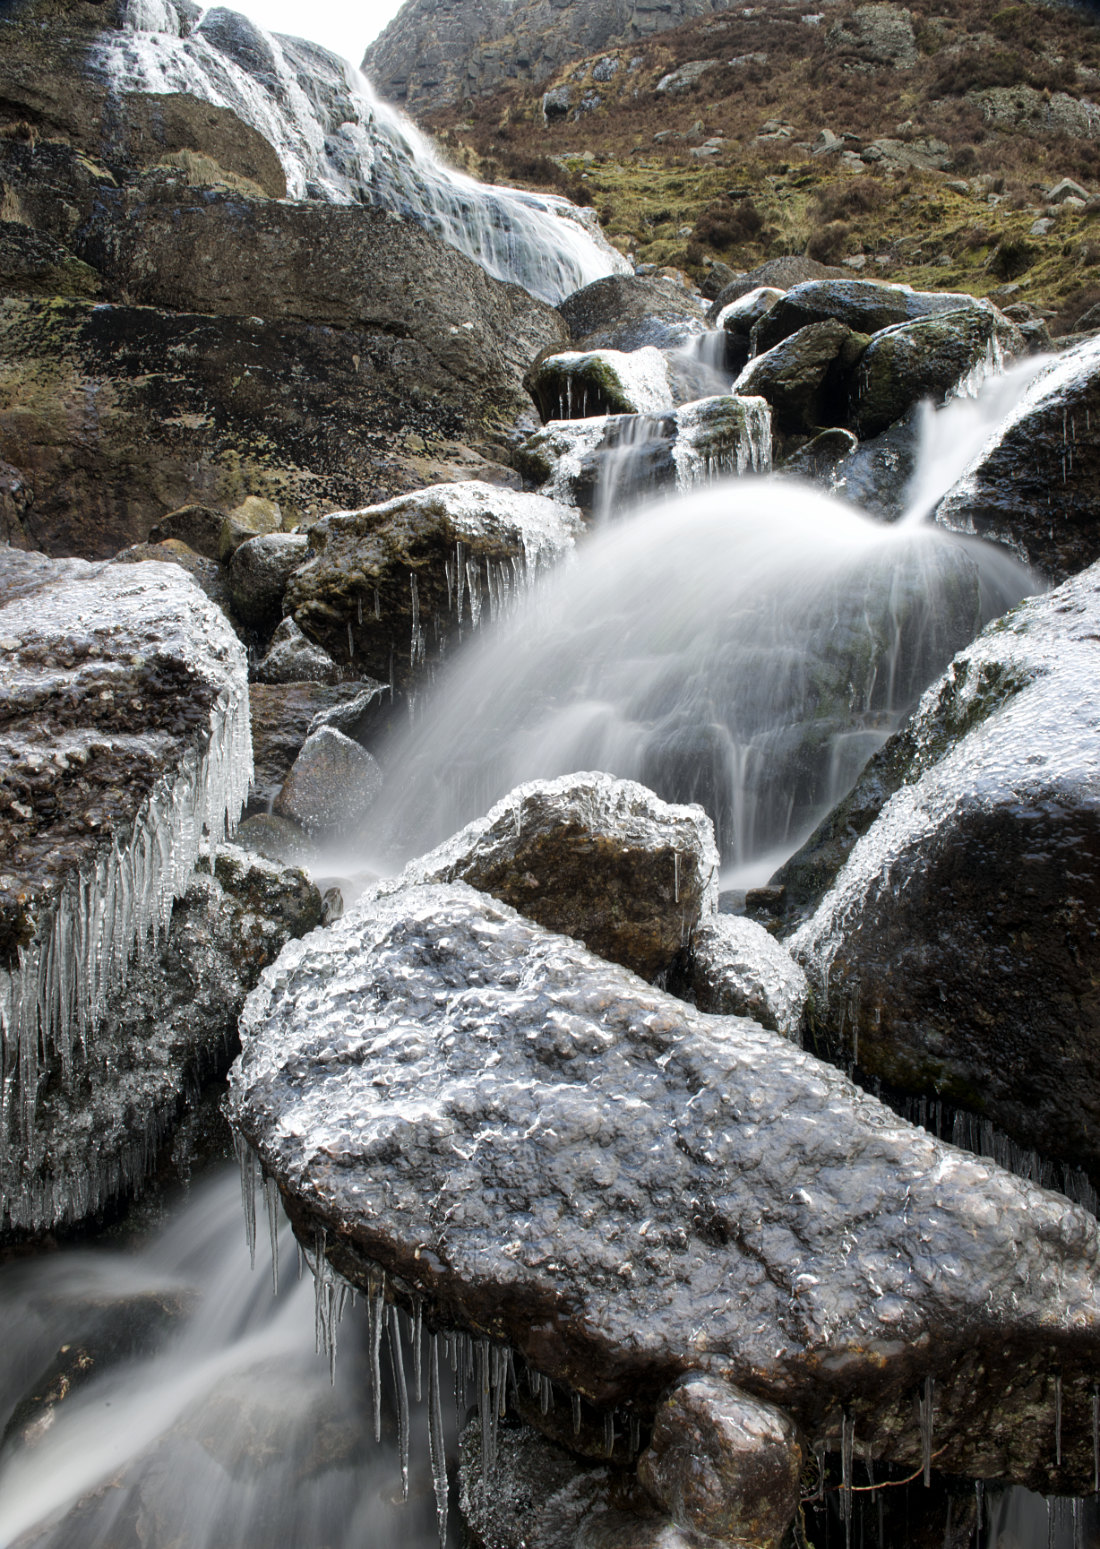 Mahon Falls in winter, Co. Waterford, Ireland